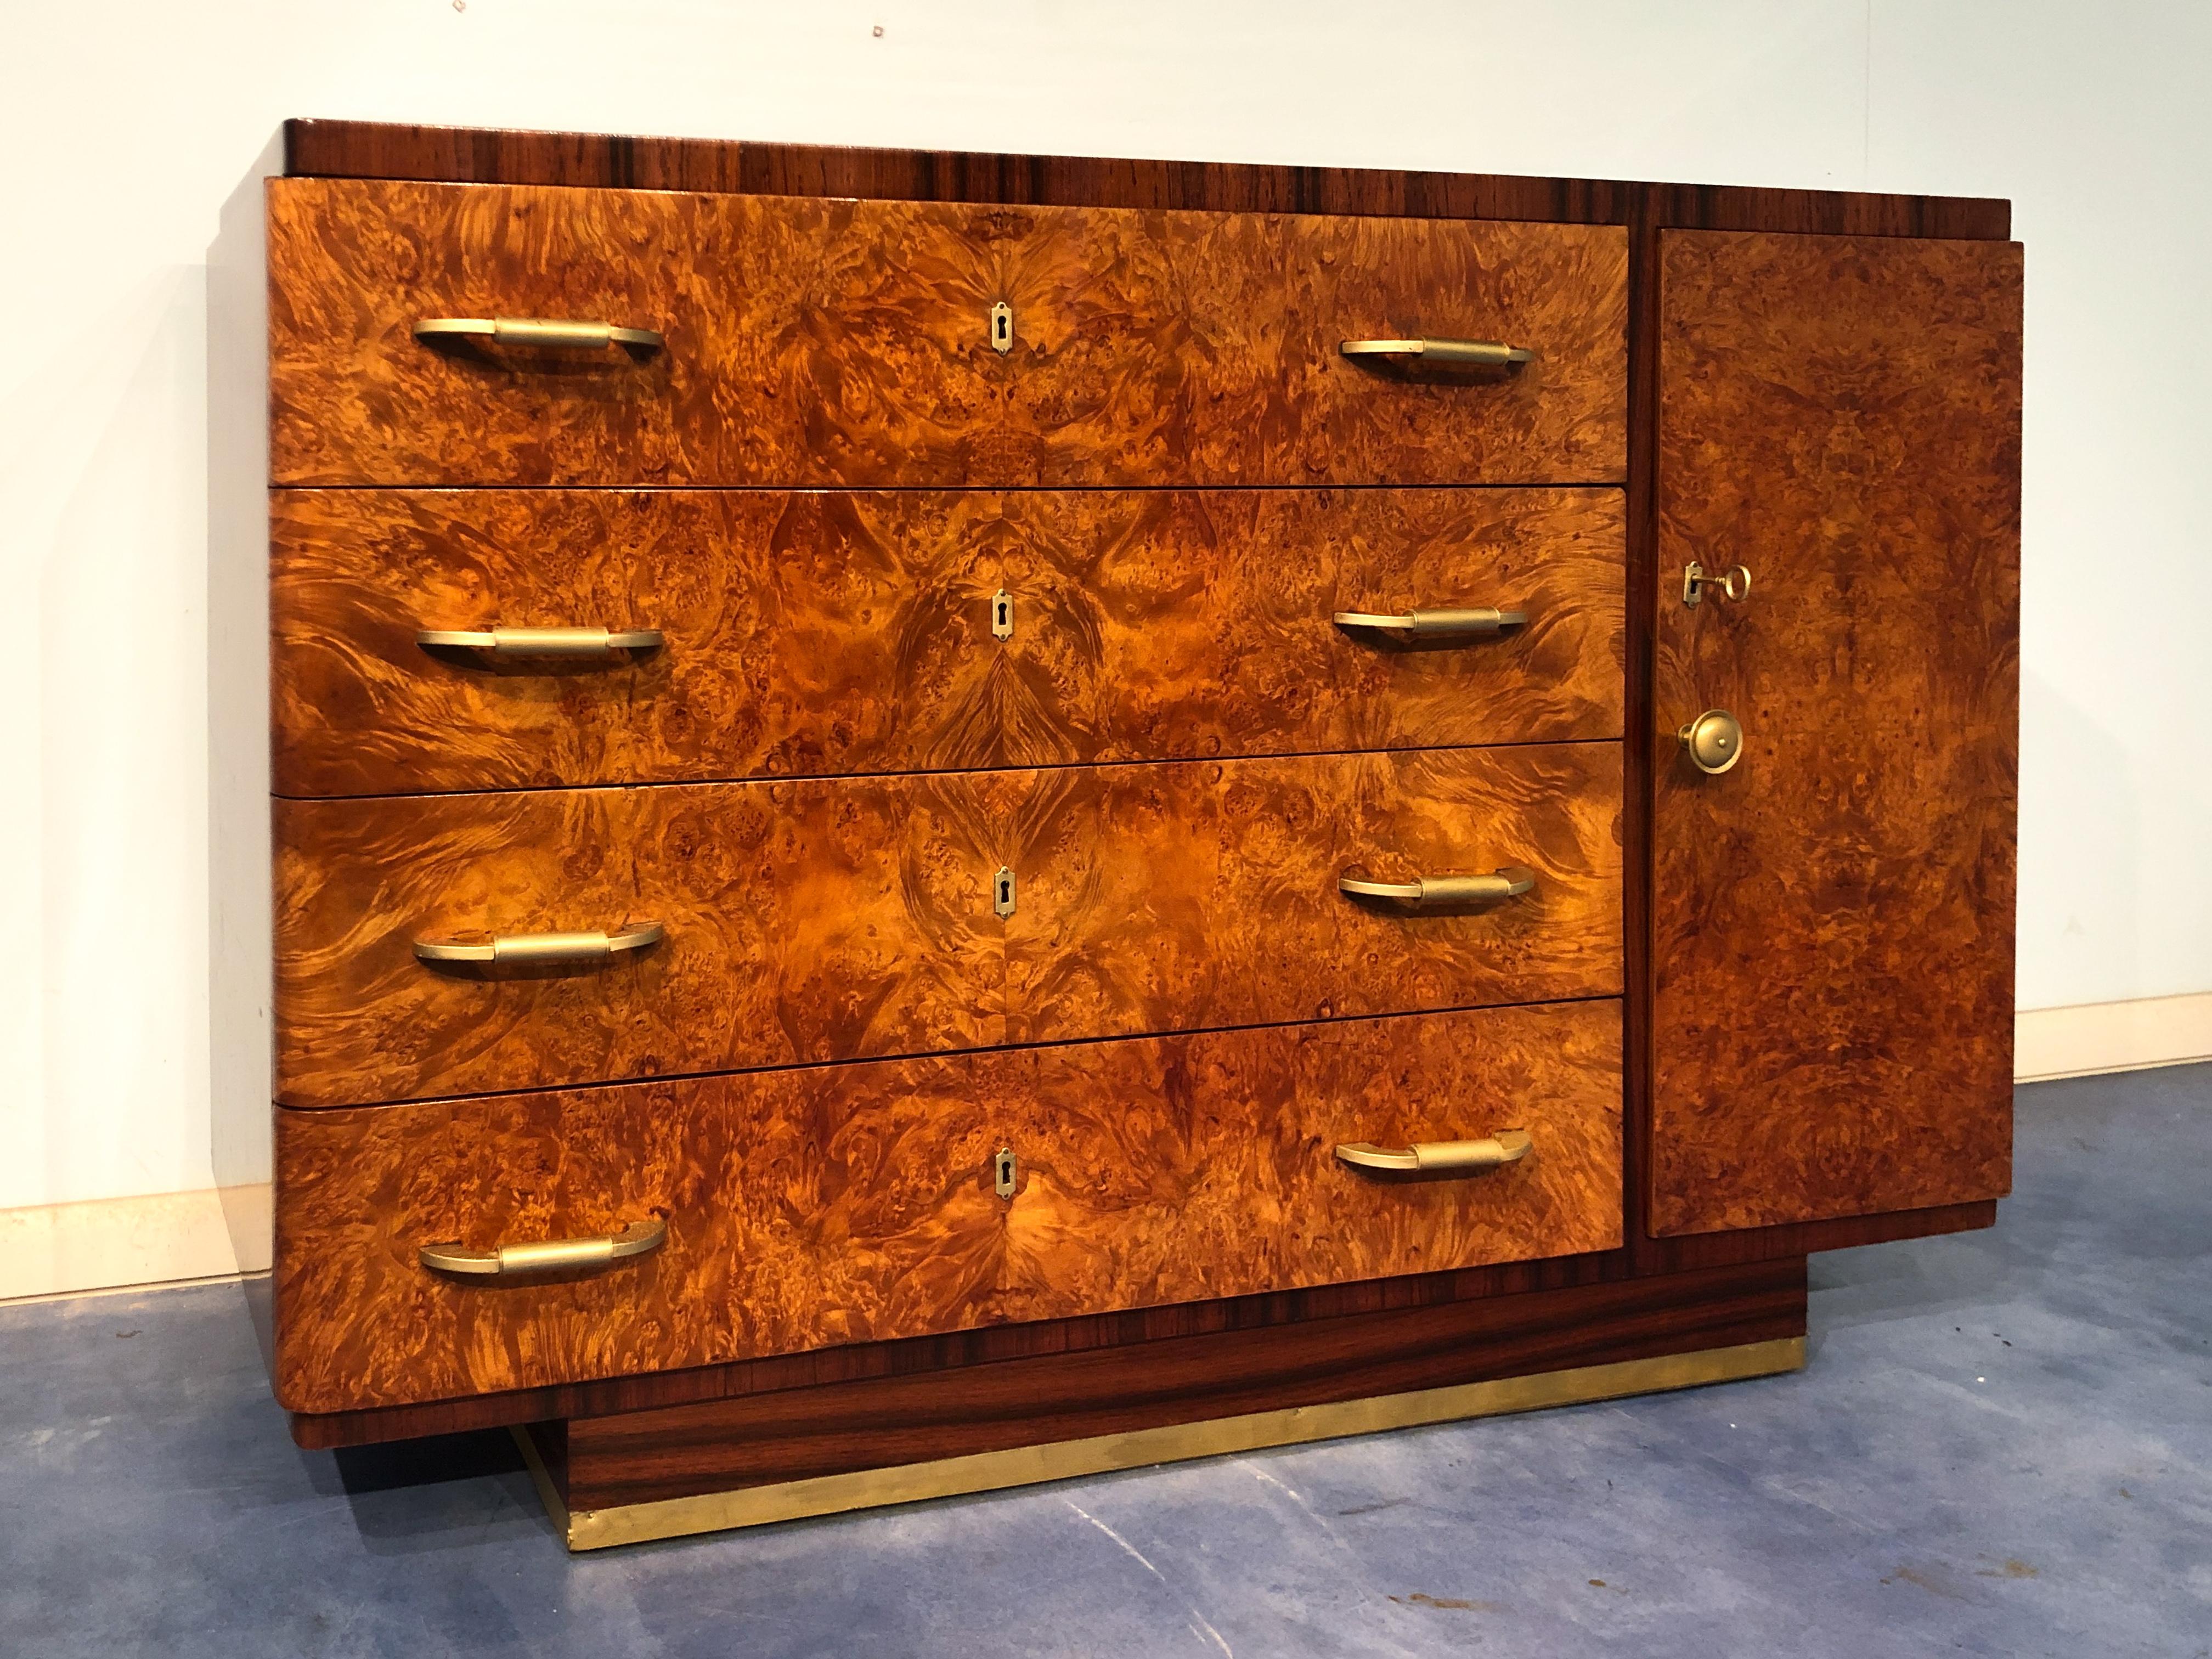 Beautiful Italian art deco chest of drawers, commode, or small sideboard in walnut, from the 1940s. The design is clearly inspired by art deco rationalist current. The walnut burl on the front is impressive and elegant. Brass curved handles on